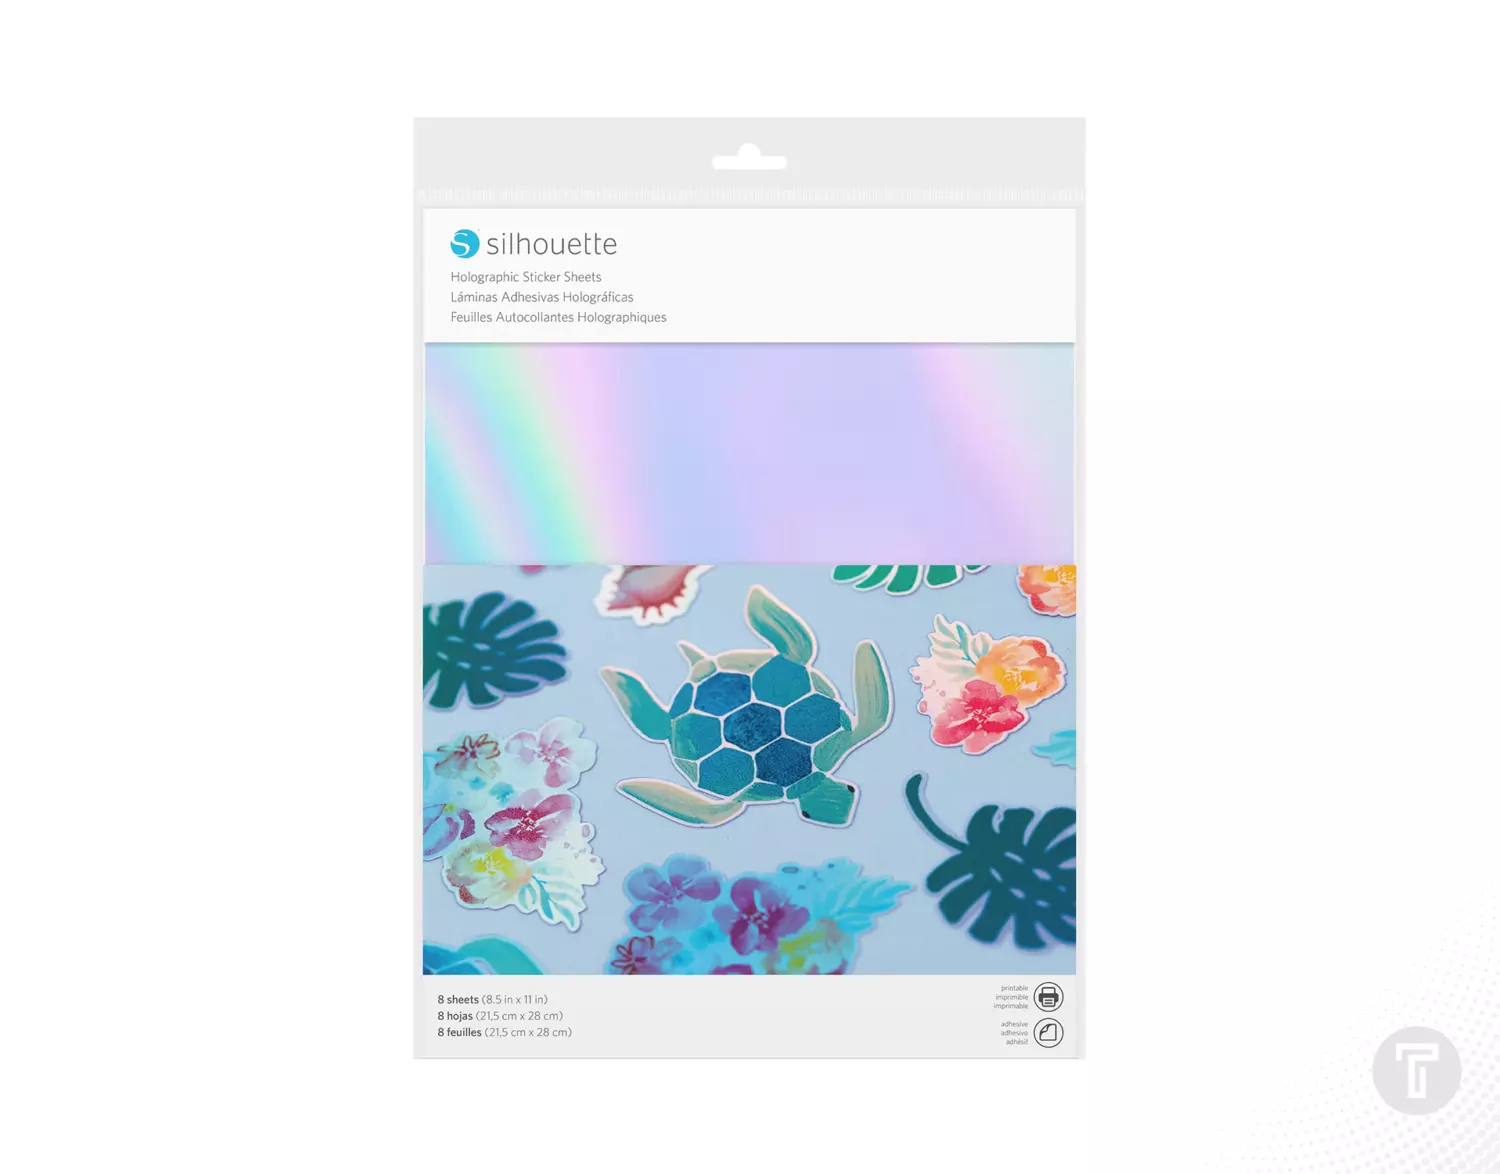 Silhouette holographic sticker sheets 8